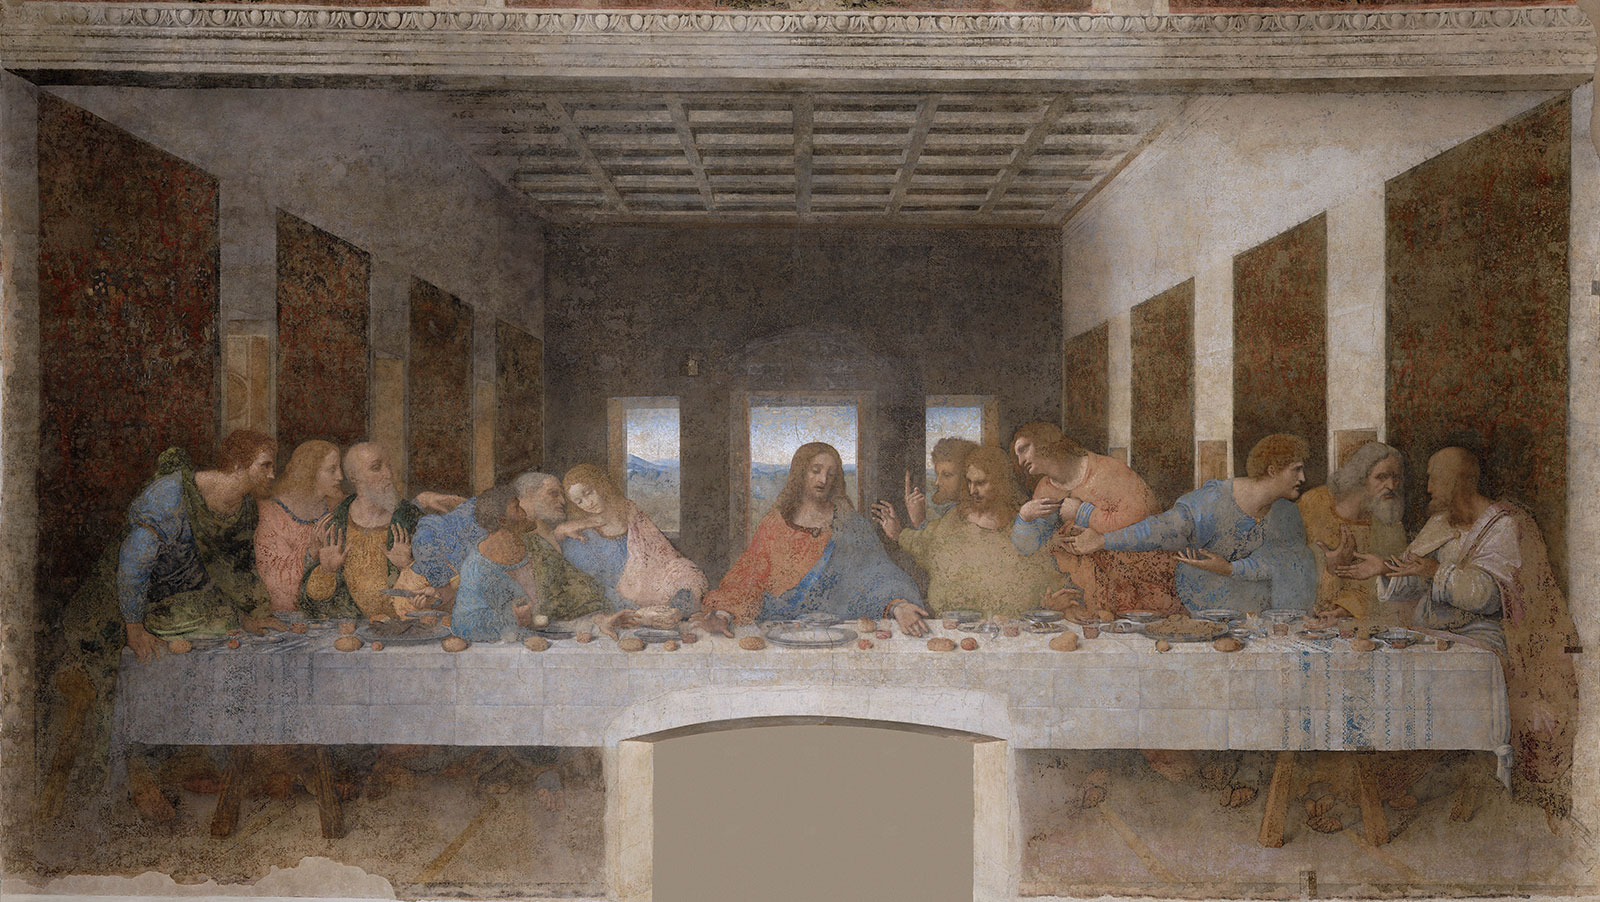 Fake Nerds Can Only Score 6/15 on This Quiz, But Real Nerds Can Score 12/15 The Last Supper Painting By Leonardo Da Vinci